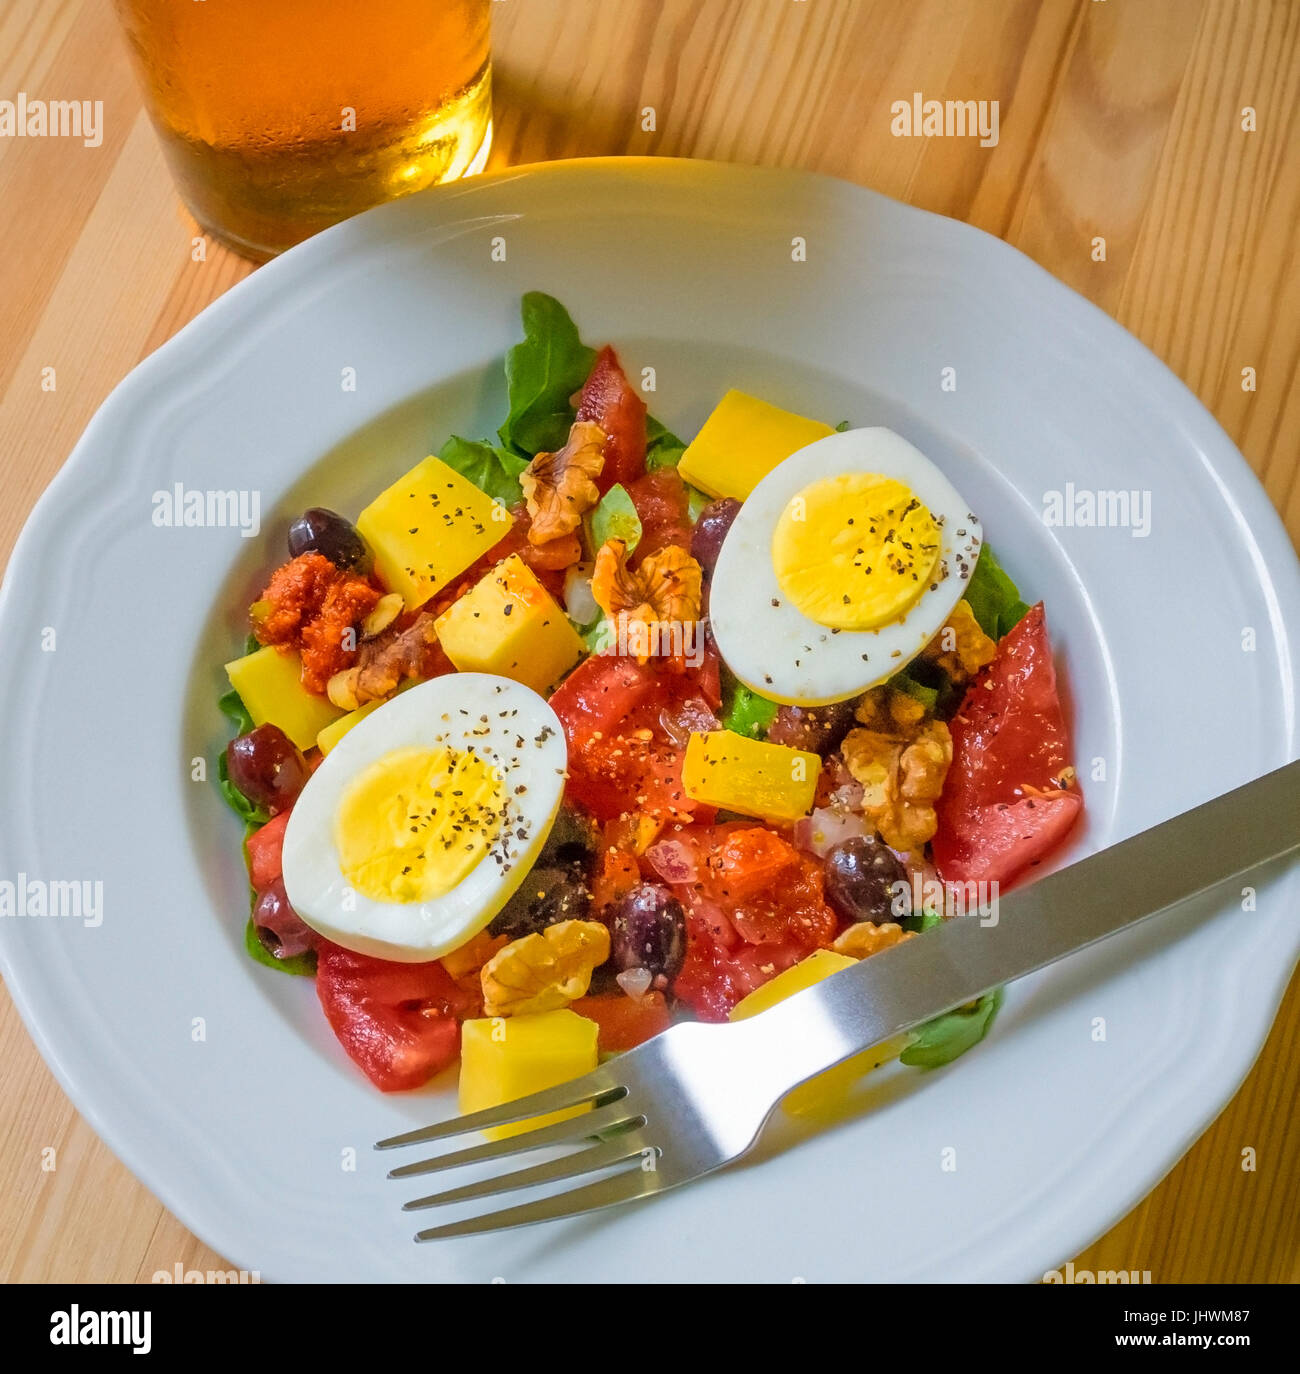 Dinner salad, with hard-boiled egg, tomatoes, cheddar chess, olives, walnuts, salsa fresca, baby arugula, and a cool pint of larger beer Stock Photo